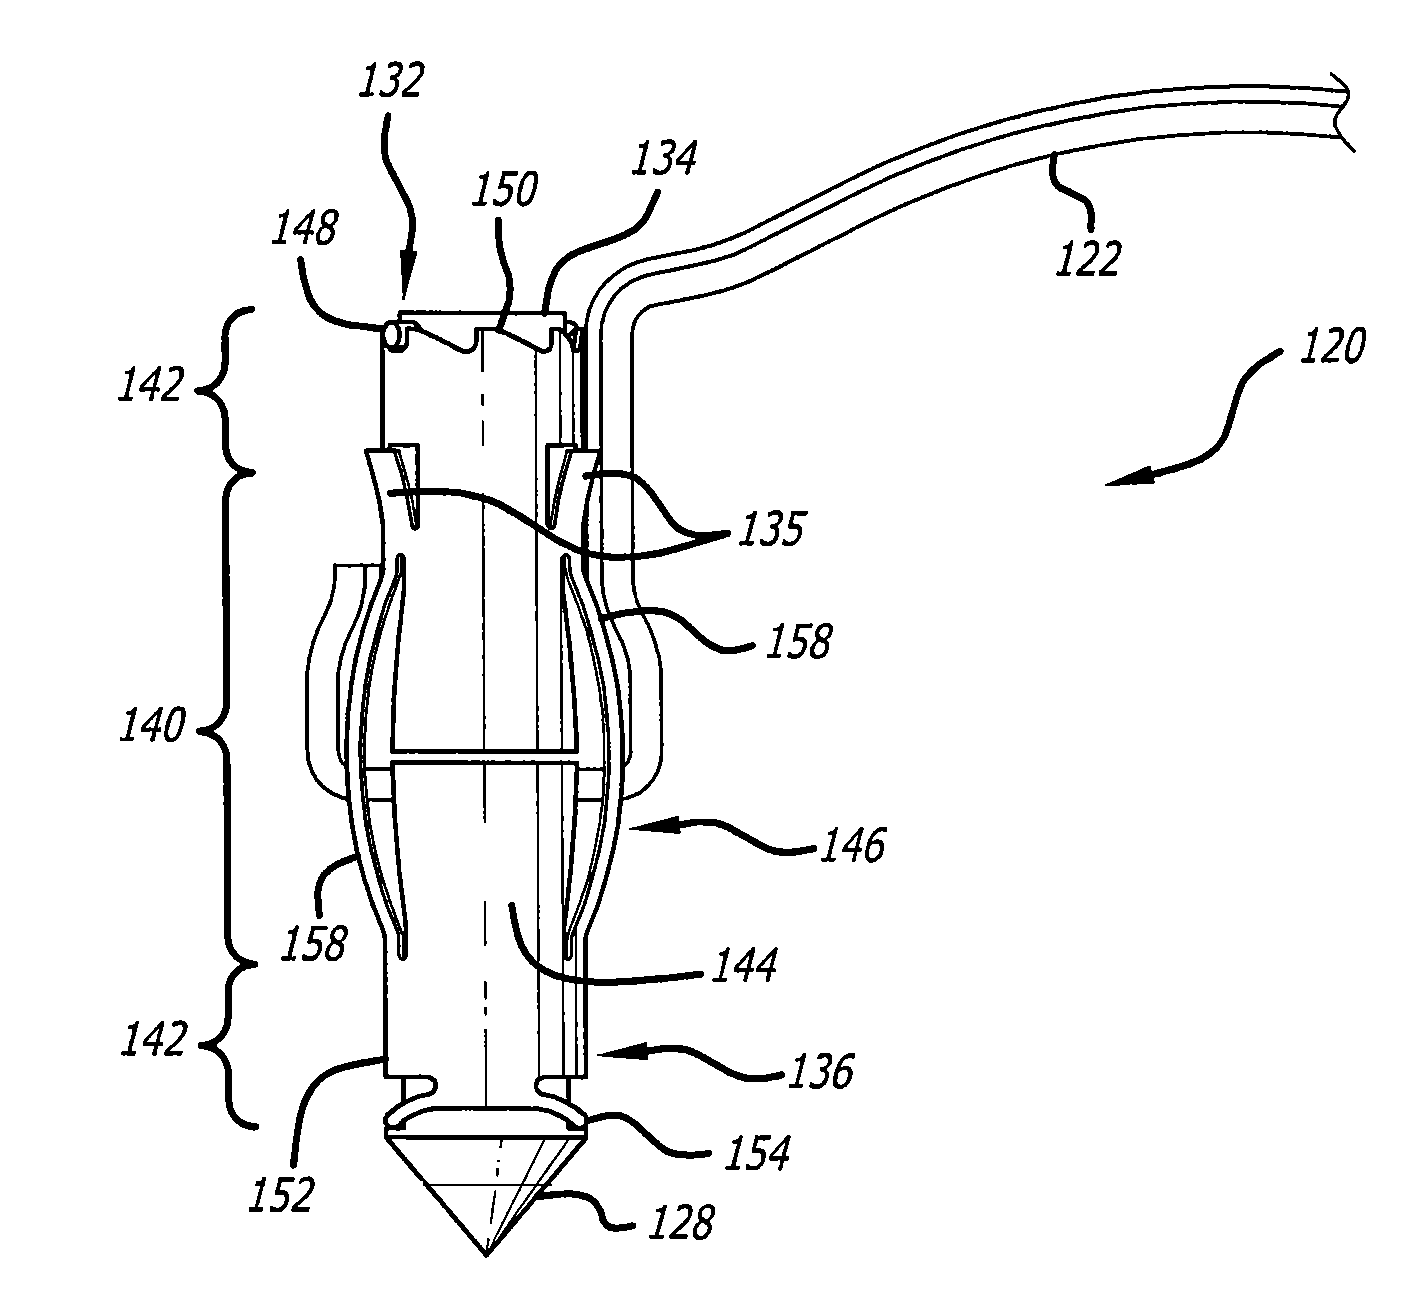 Knotless suture anchor for soft tissue repair and method of use